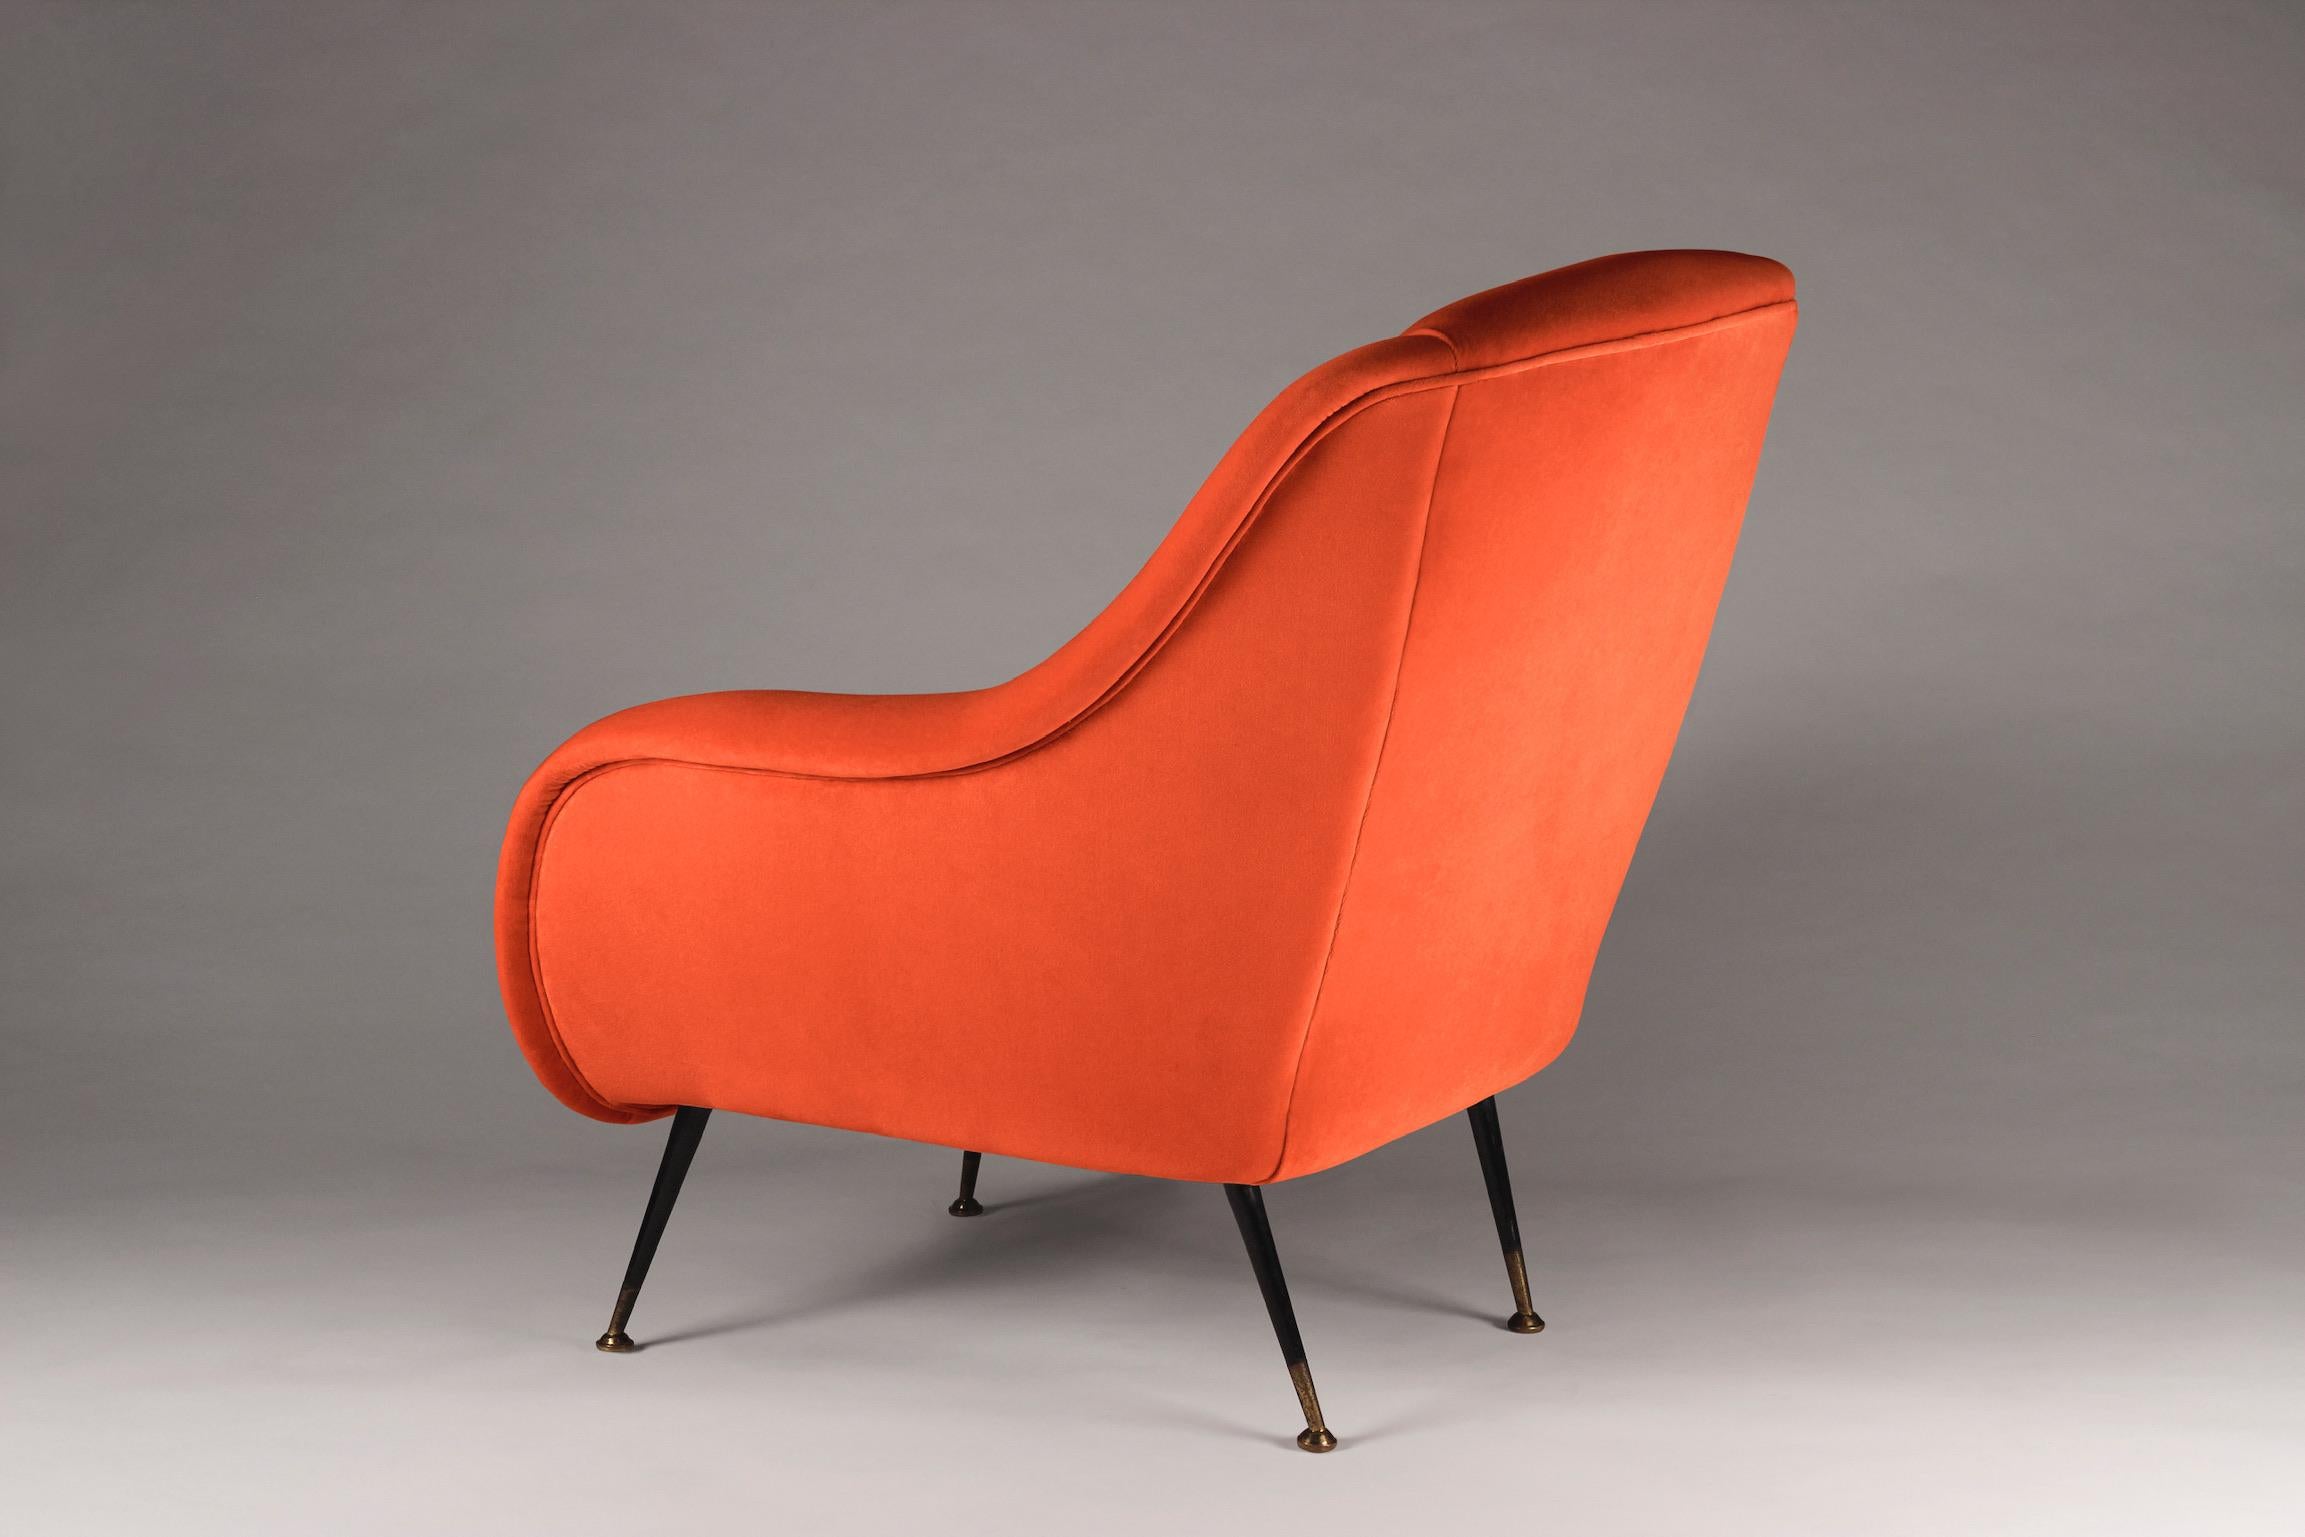 Pair of Mid-Century Modern 1950s Style Italian Lounge Chair Sophia in Orange In New Condition For Sale In London, GB